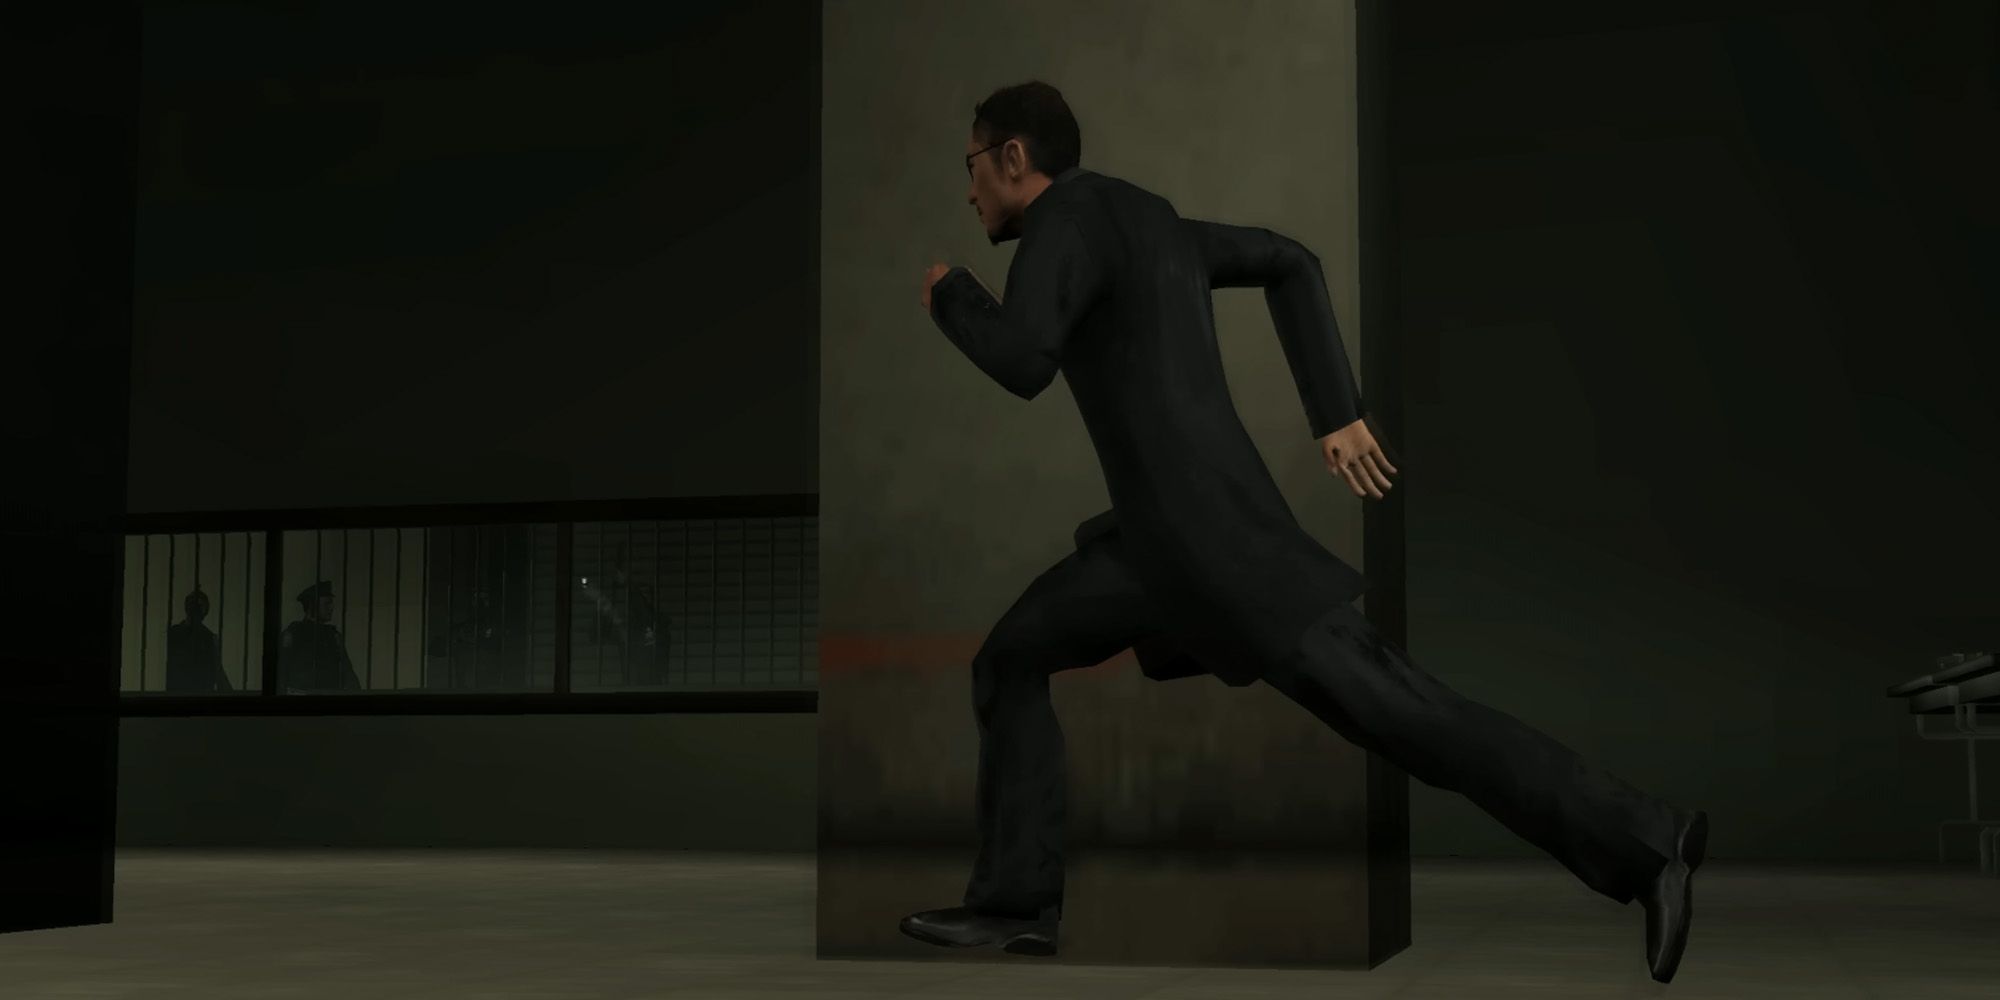 Enter The Matrix character Ghost running through a drab facility.